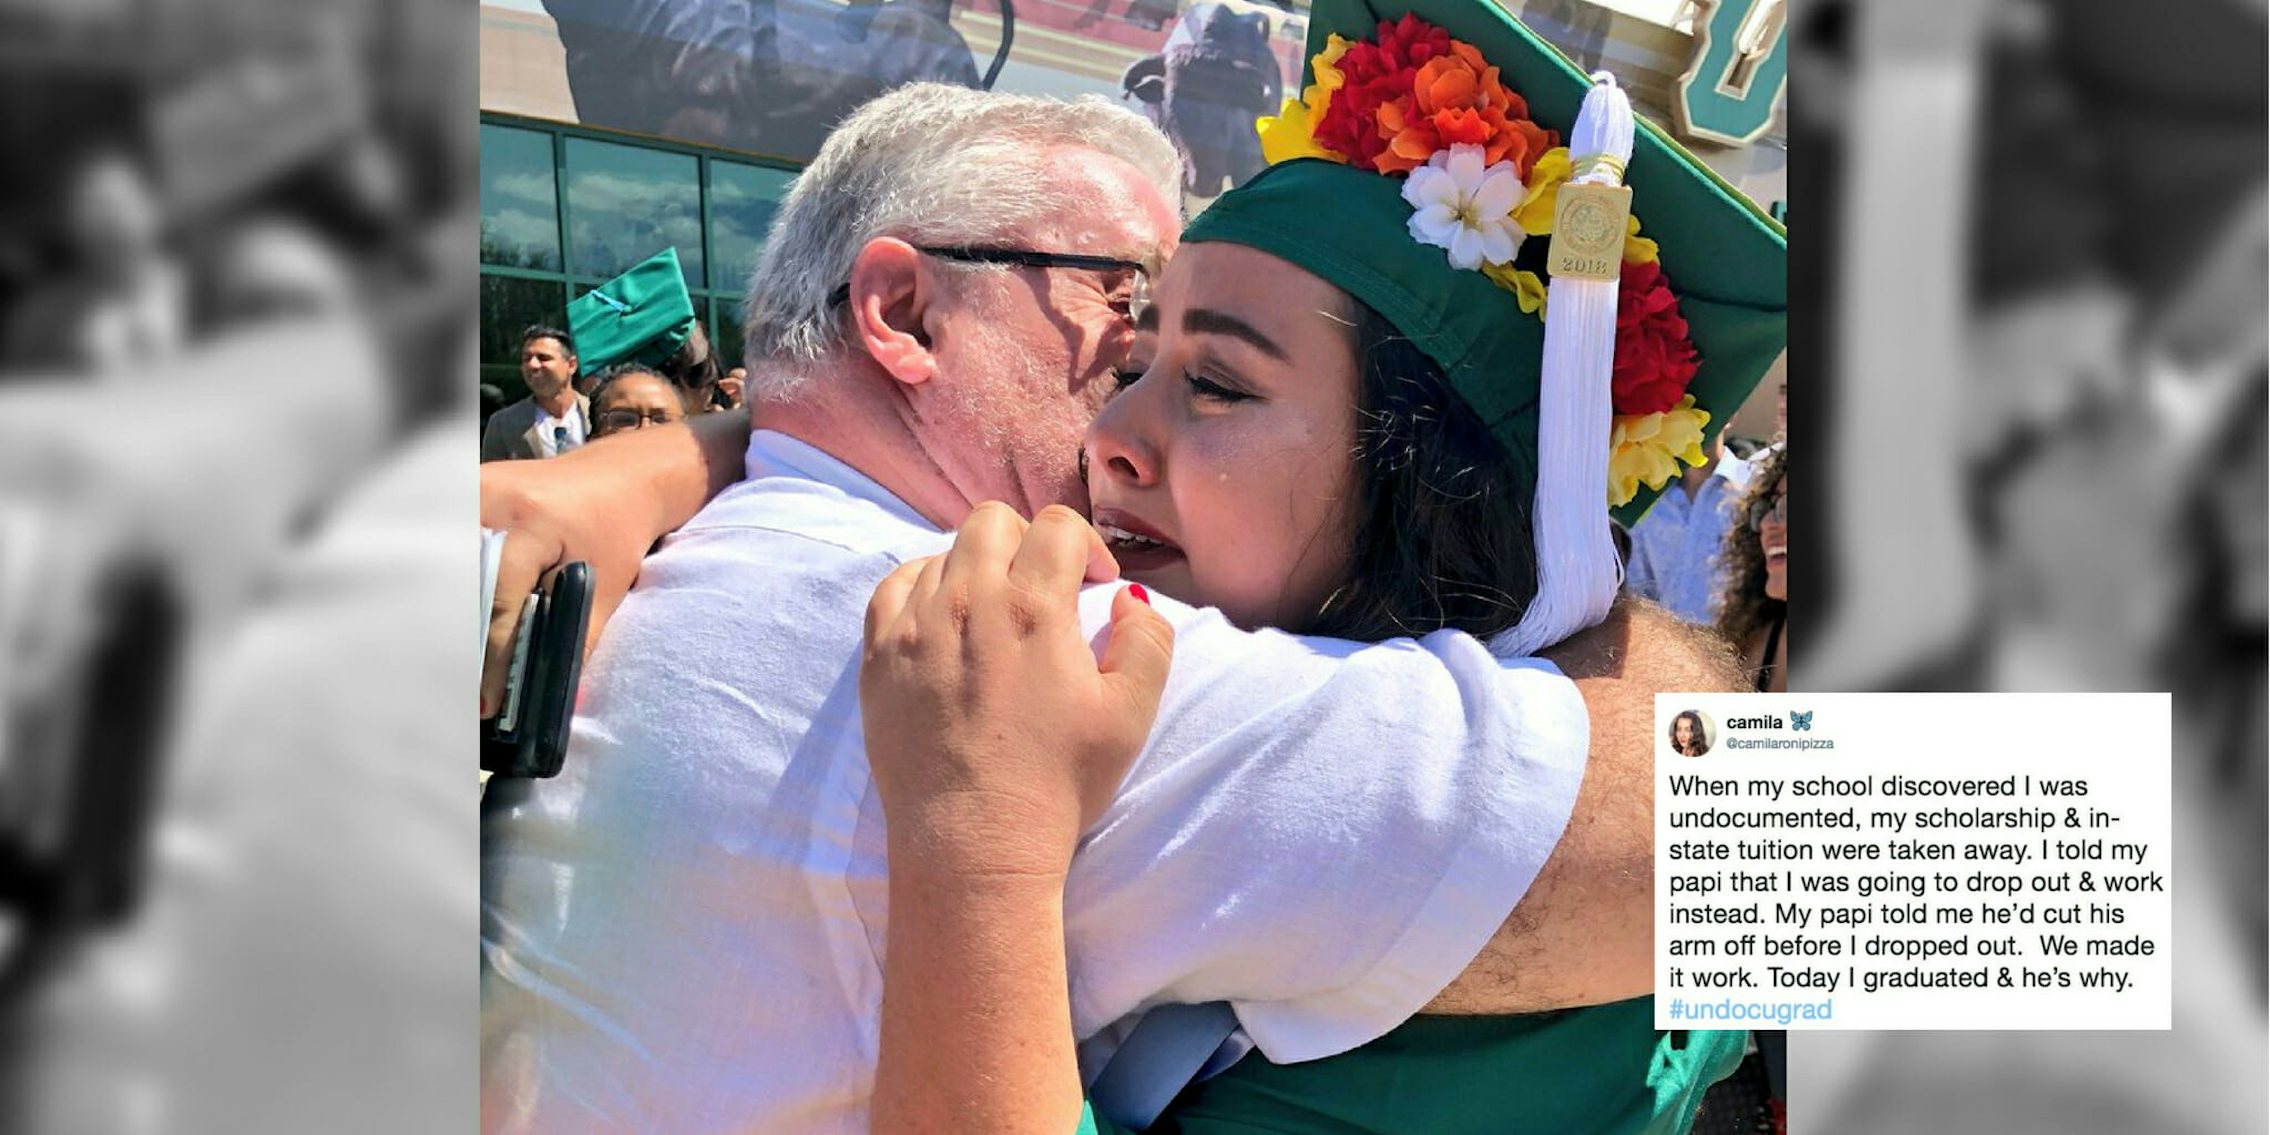 Camila Silva tearfully embracing her father after she, a DACA recipient, graduated from college.